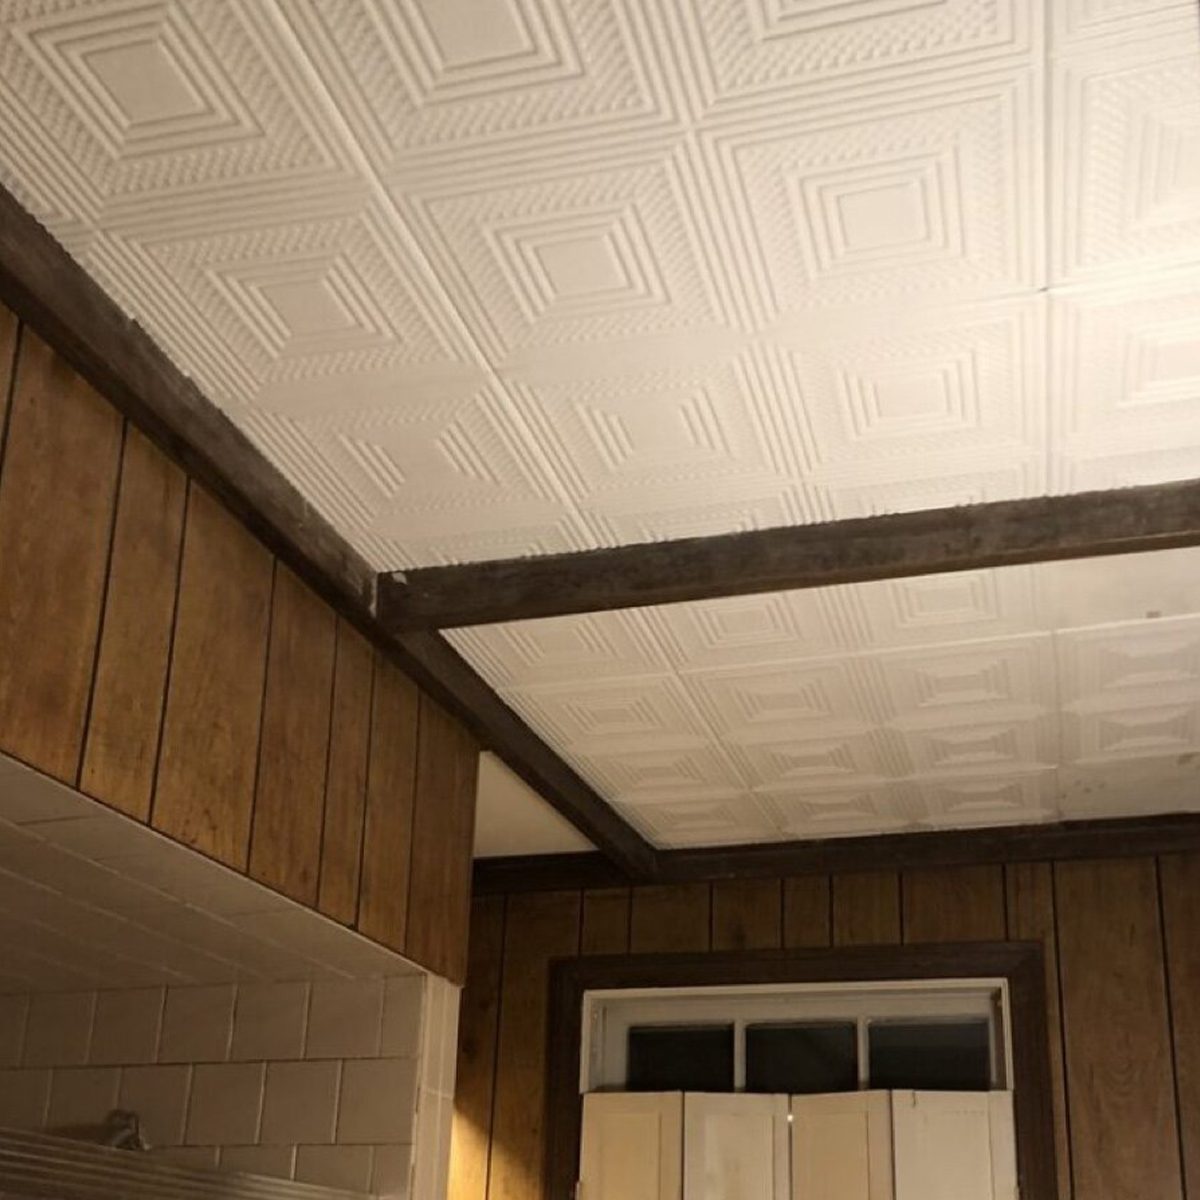 11 Ways To Er A Hideous Ceiling That